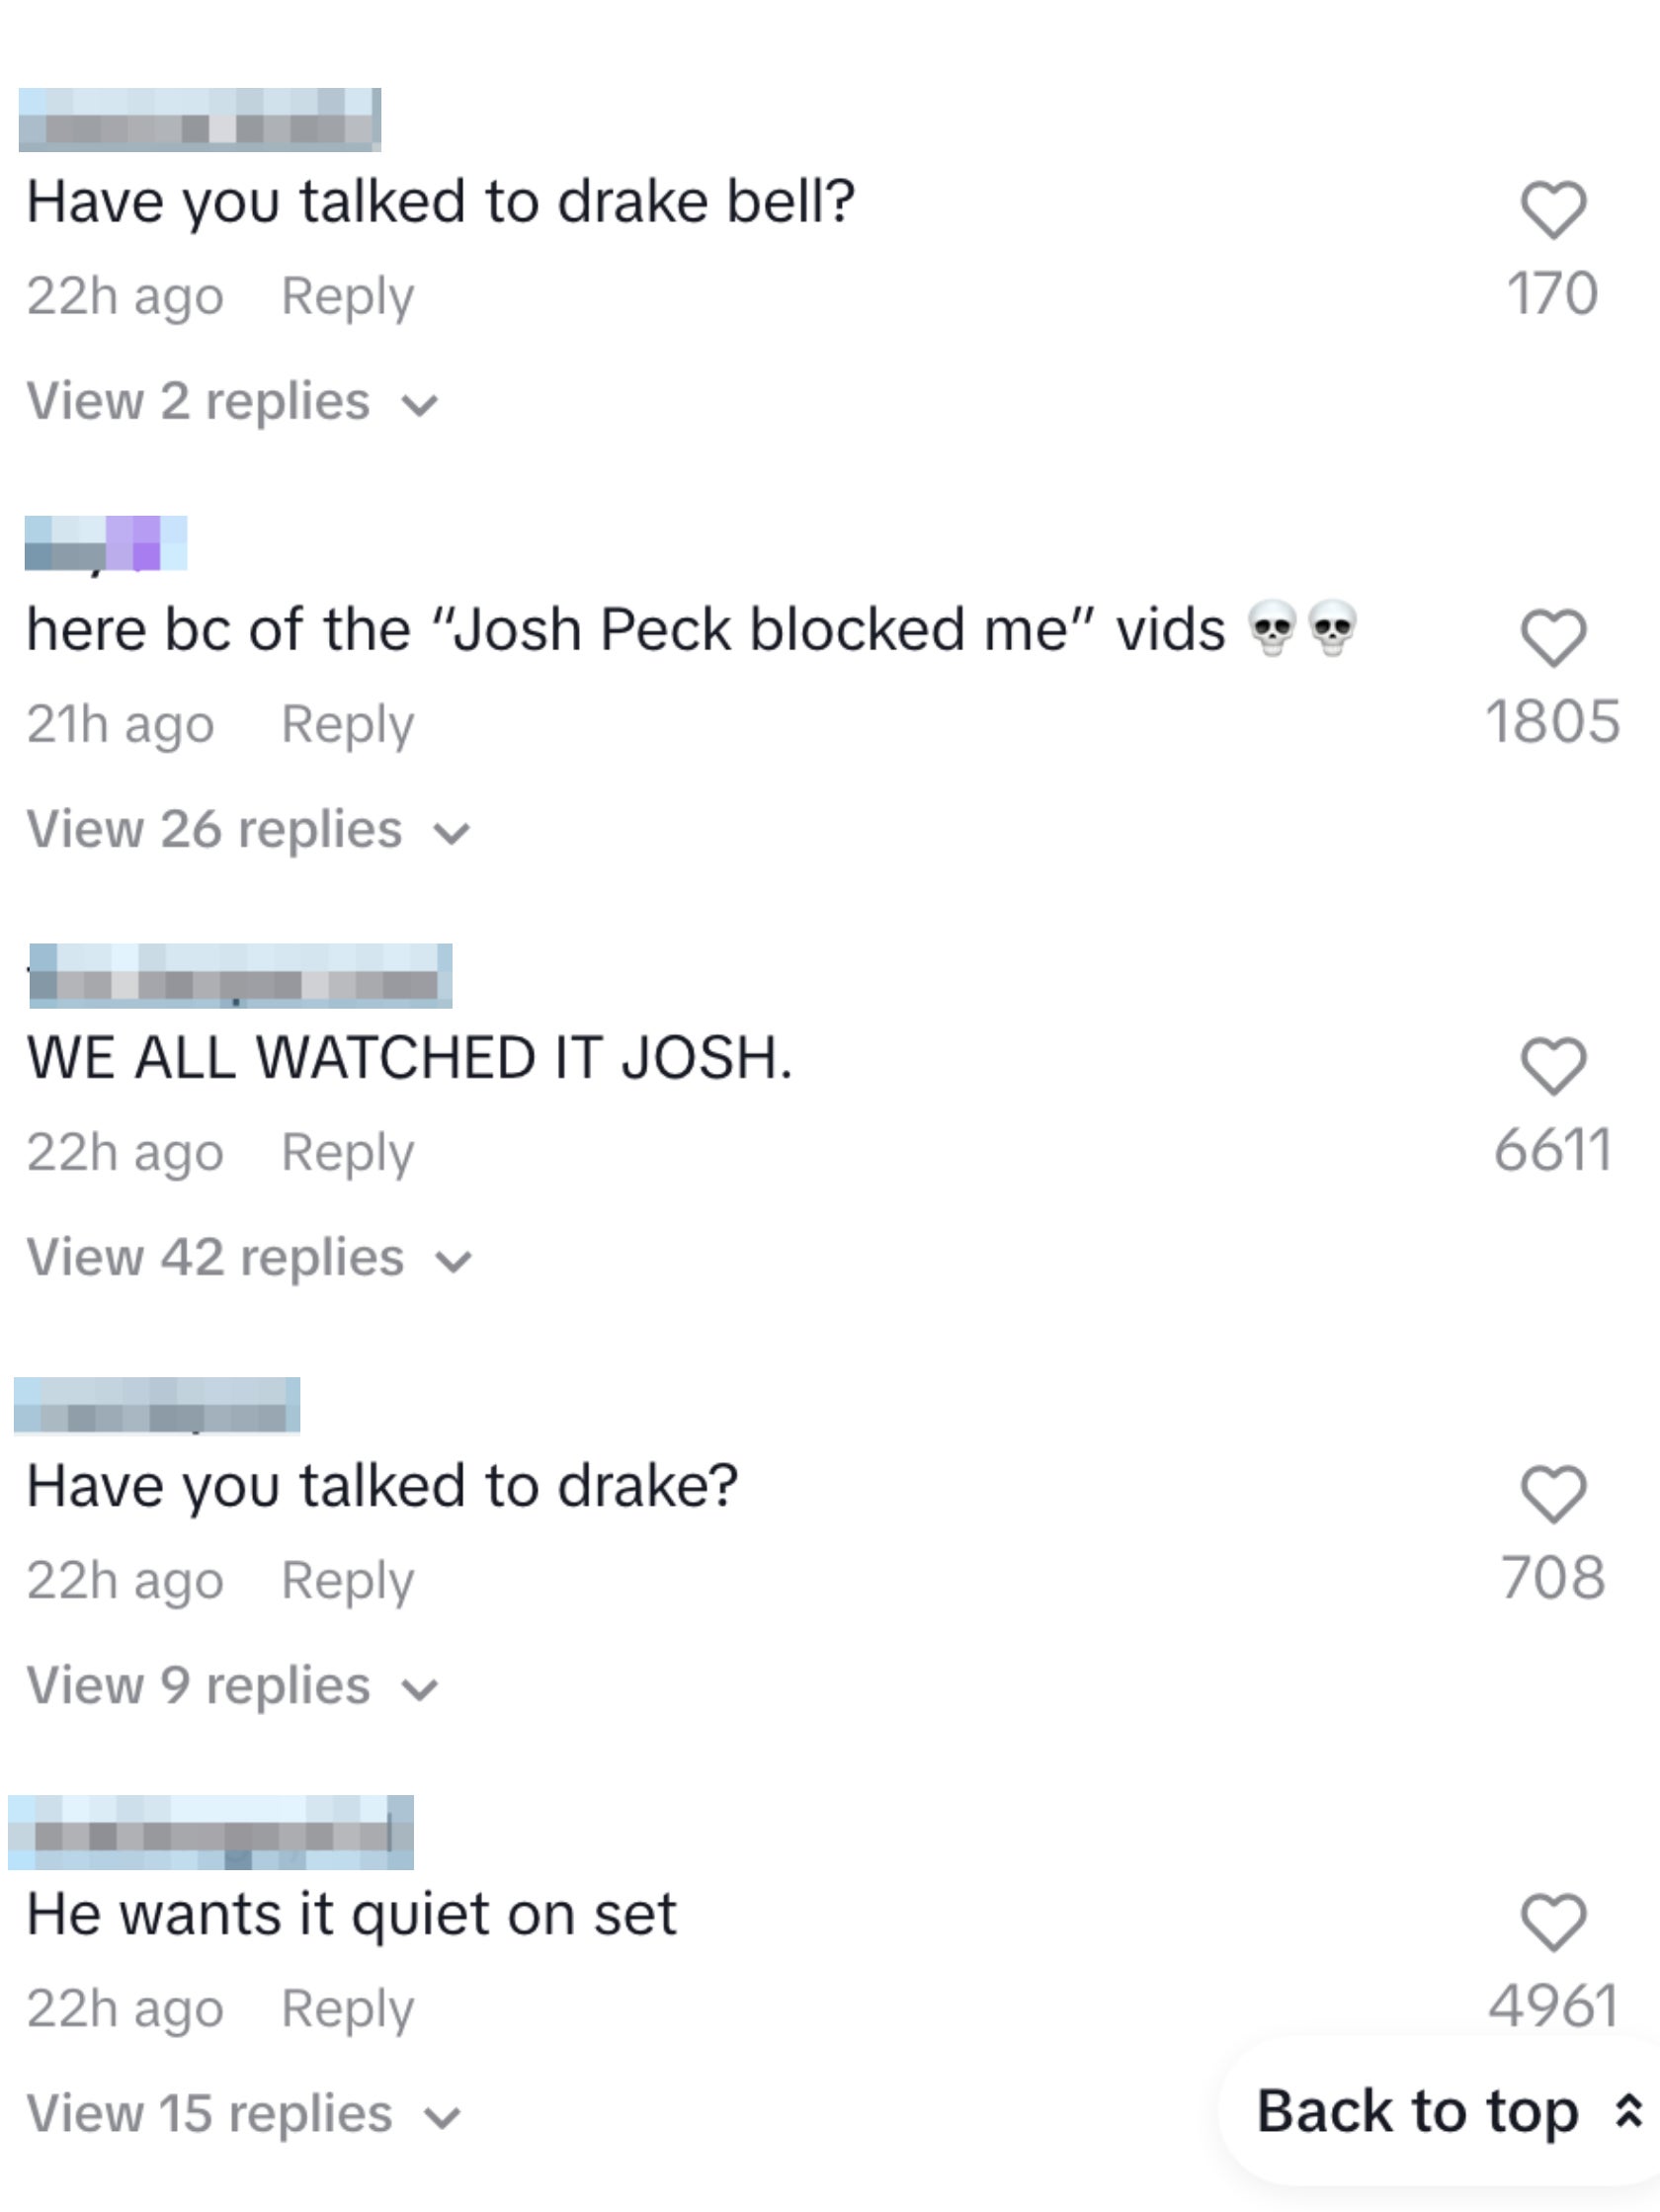 Screenshot of social media comments with users asking if someone has talked to Drake Bell and discussing Josh Peck–related videos